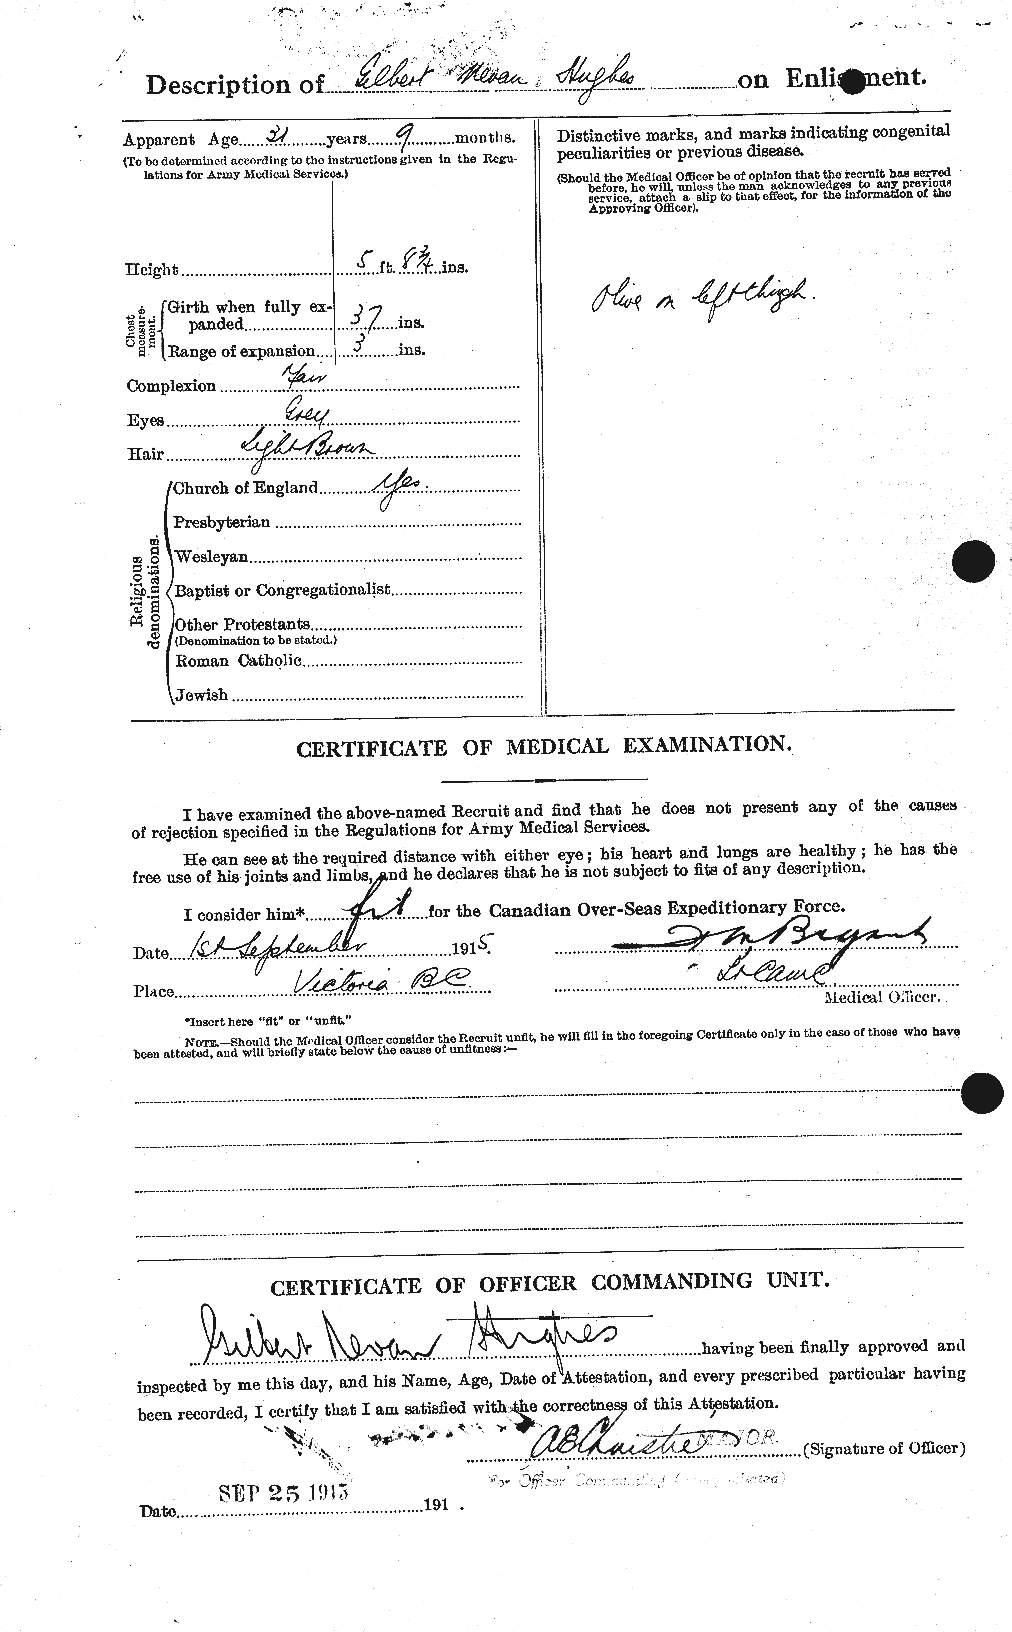 Personnel Records of the First World War - CEF 403842b